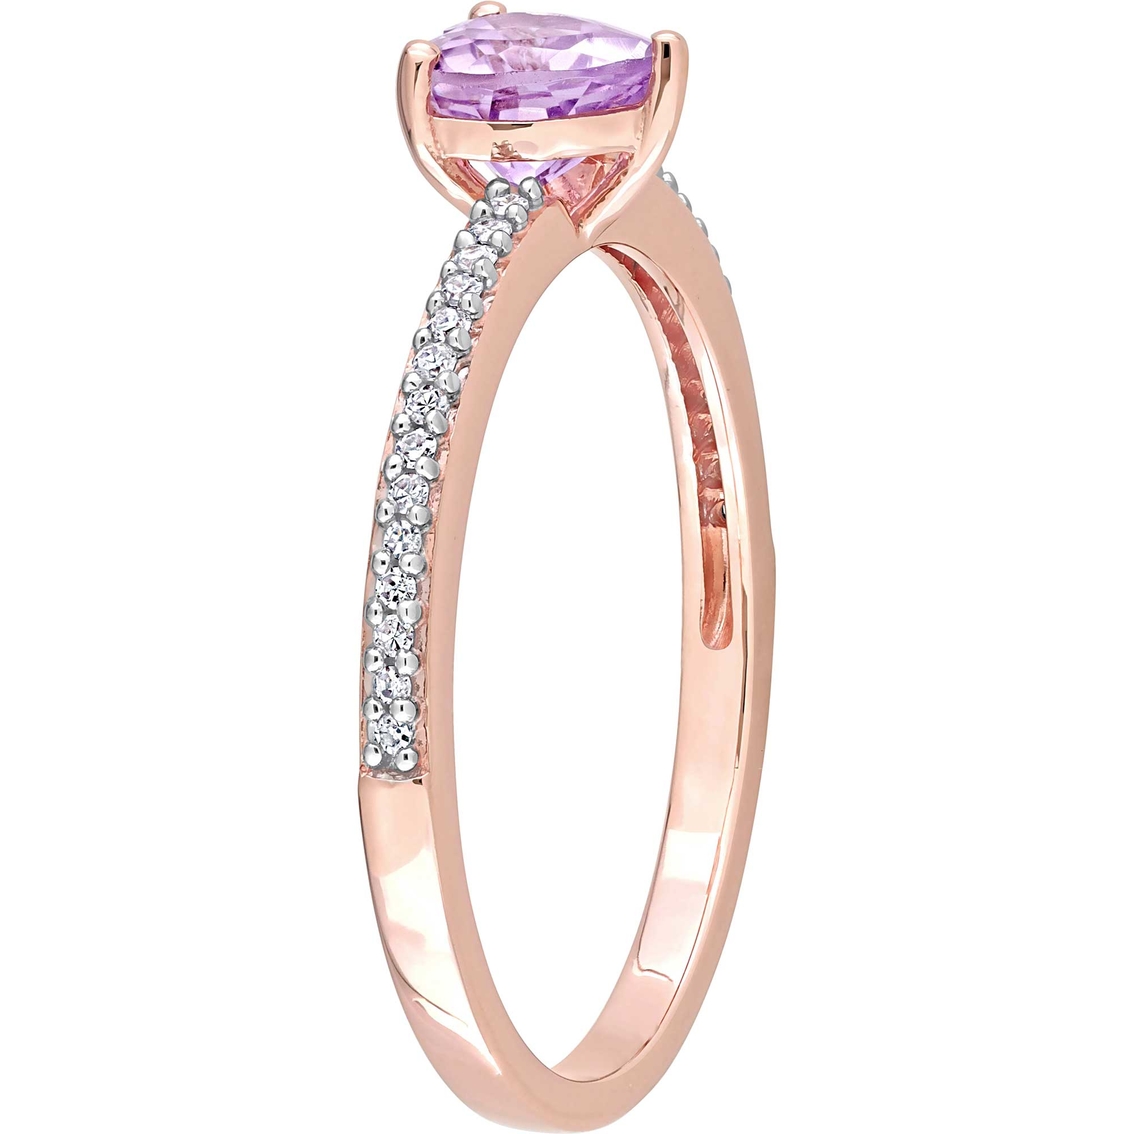 Sofia B. 10K Rose Gold Pink Amethyst and 1/10 CTW Diamond Heart Ring - Image 2 of 4